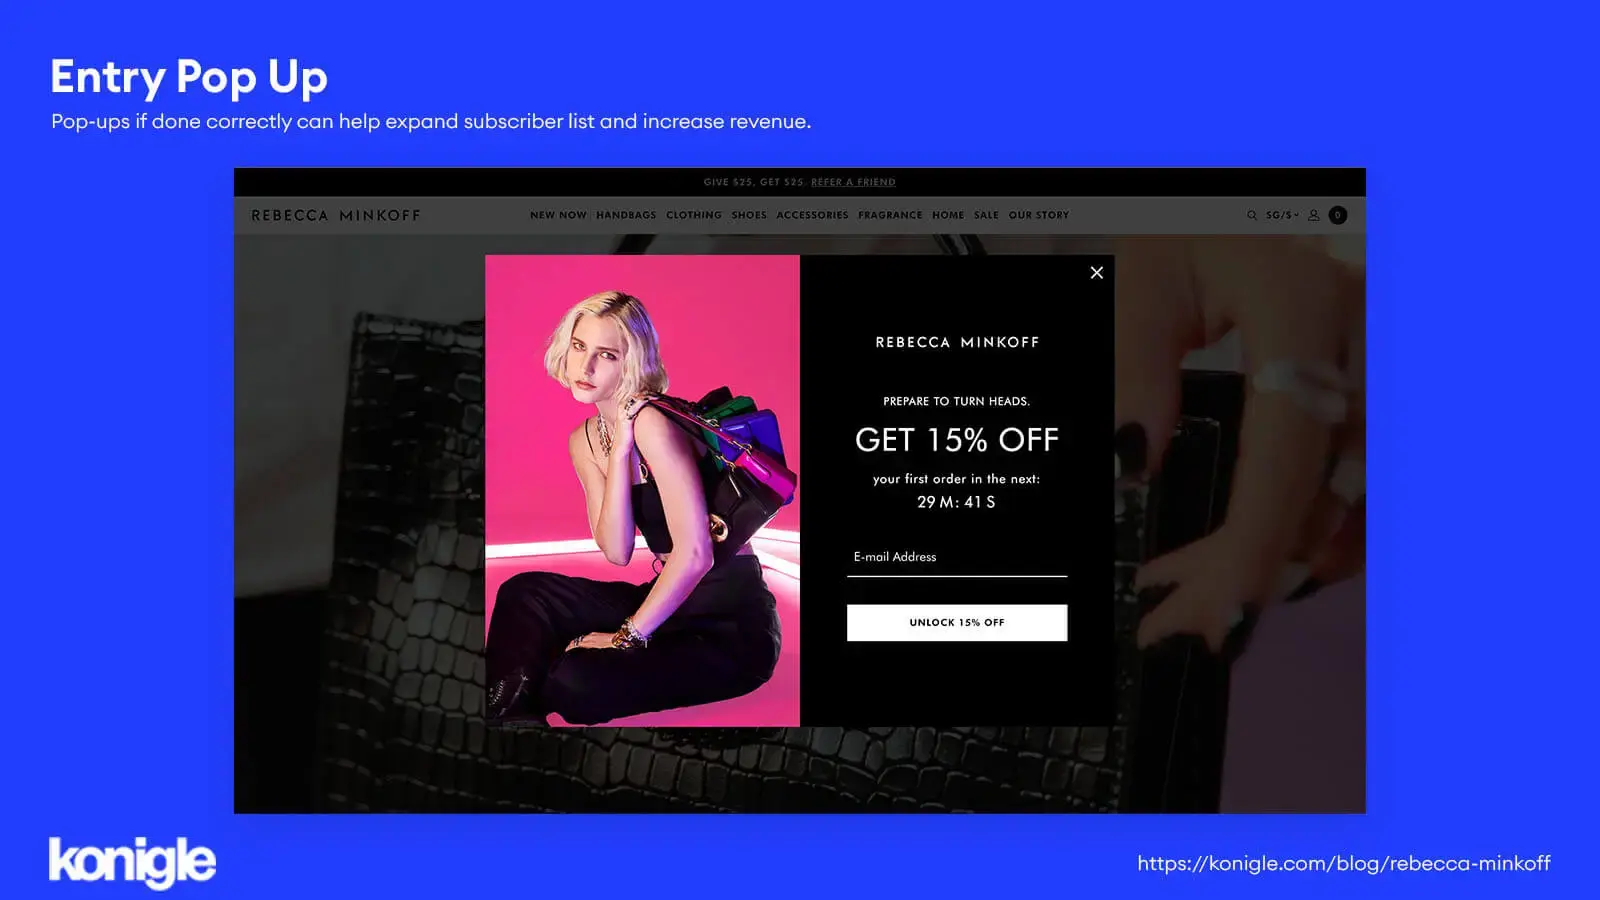 Pop-up offering a discount to new visitors in exchange for their email